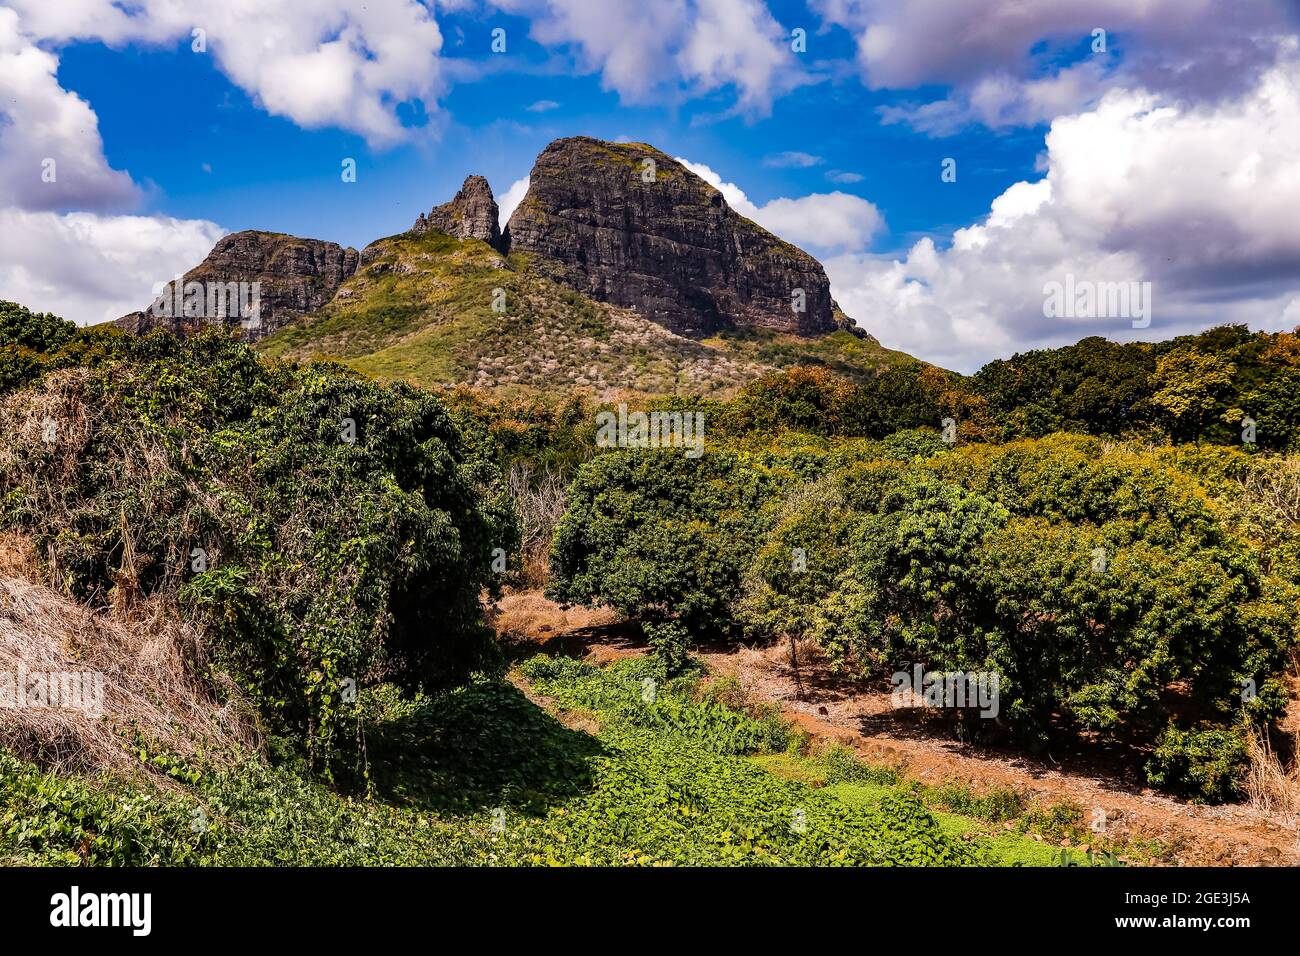 The mountain formation Trois Mamelles in front of lush green nature near the west coast of Mauritius in the Indian Ocean Stock Photo